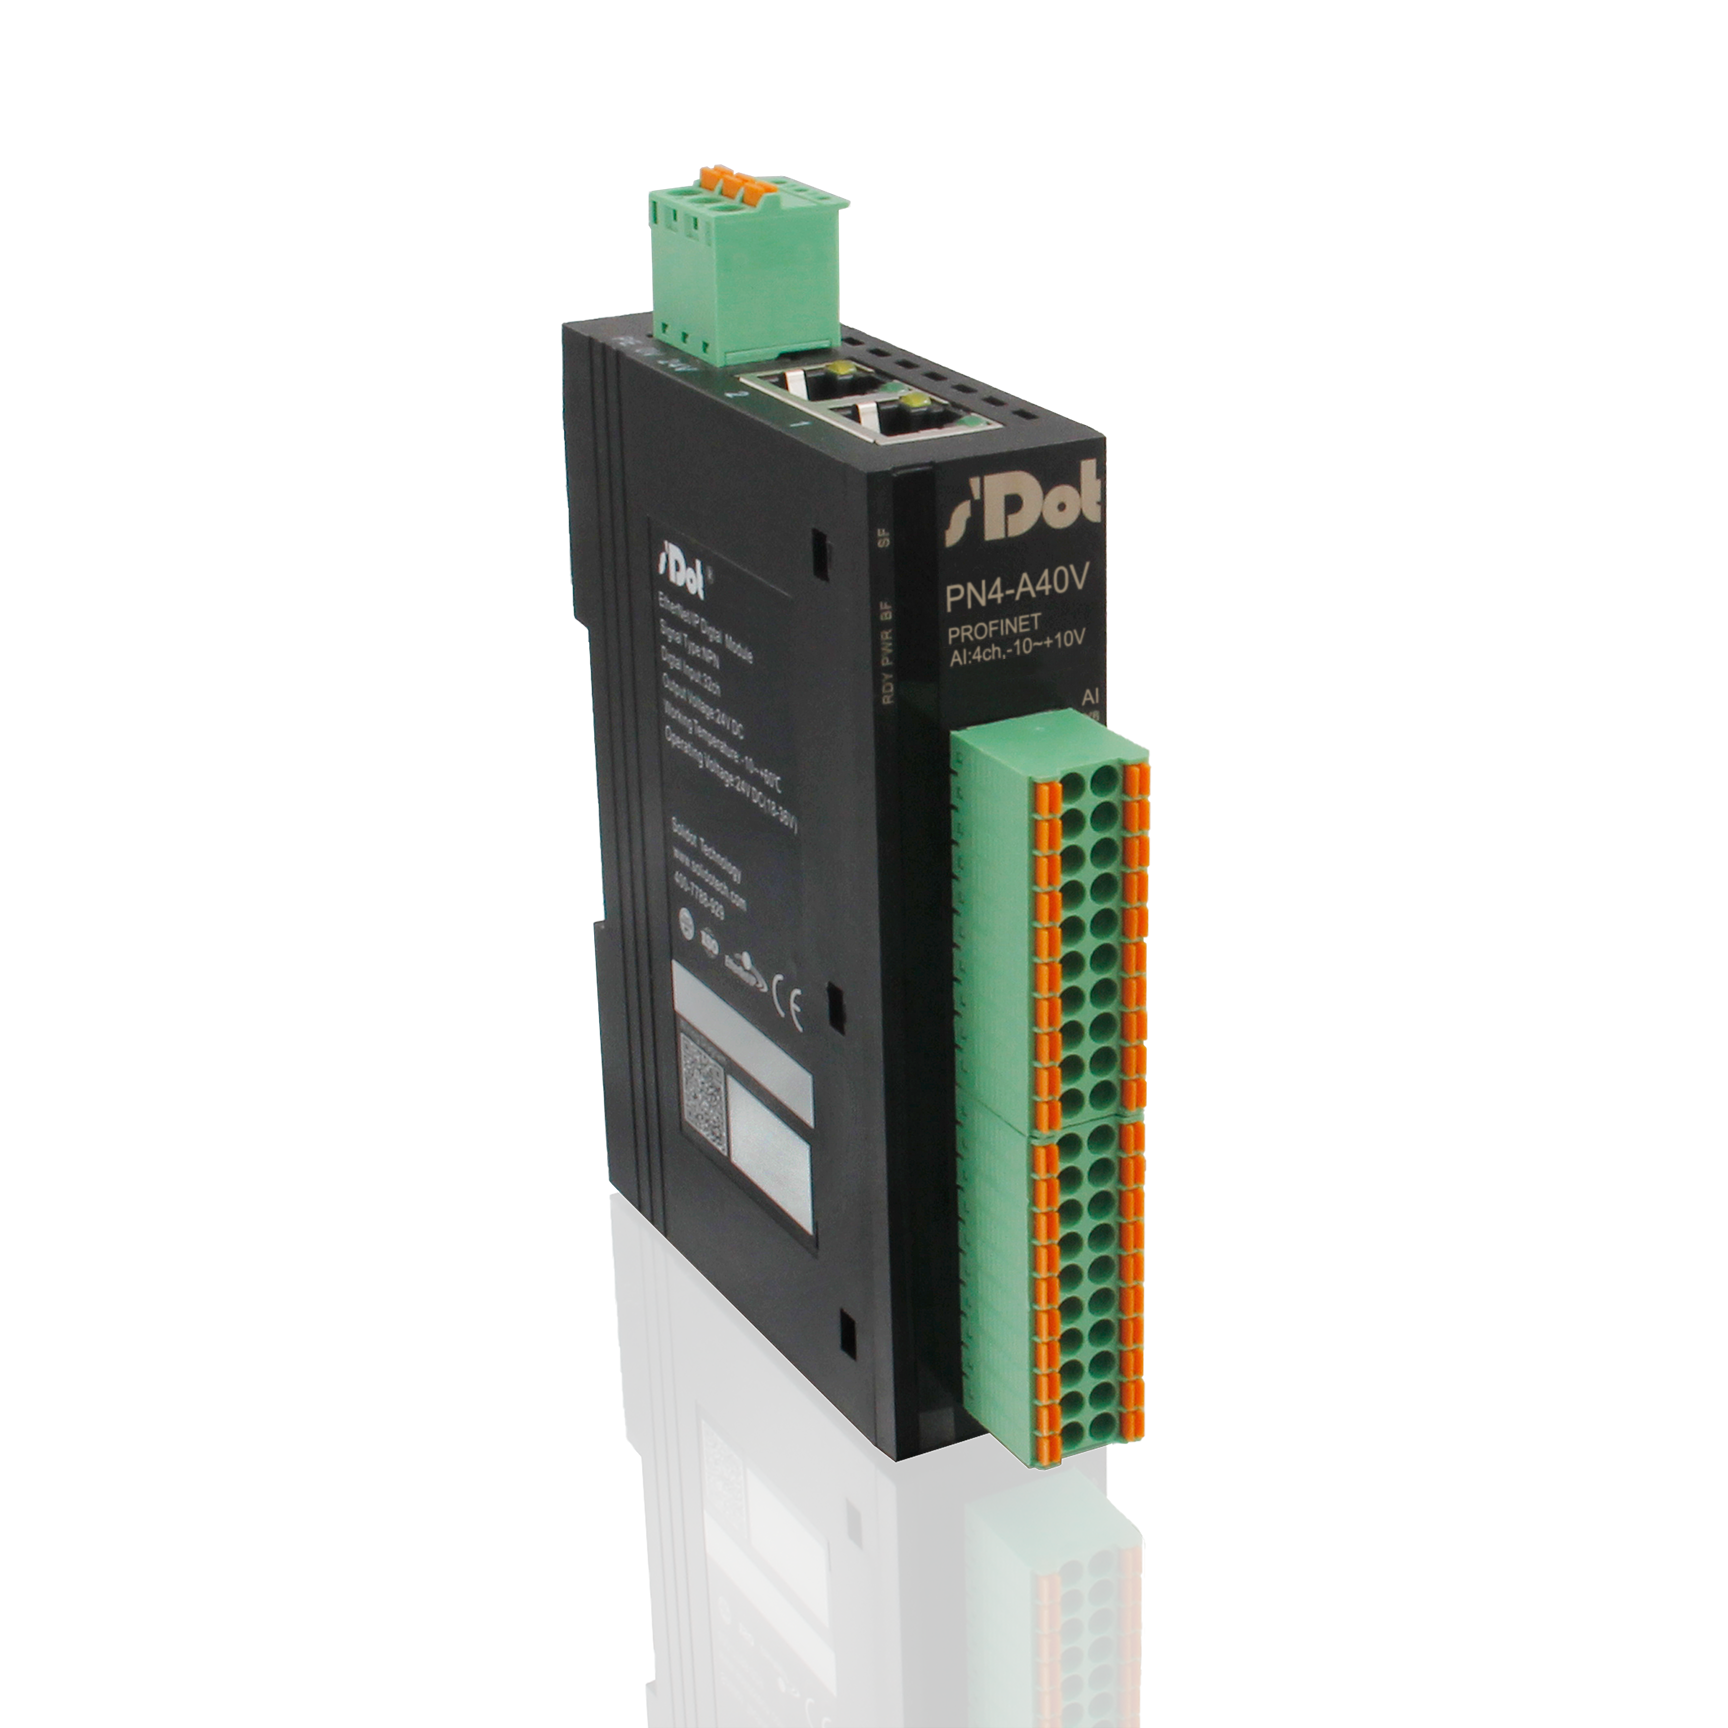 Solidot Profinet remote I/O module PN4 with 4 analog channels